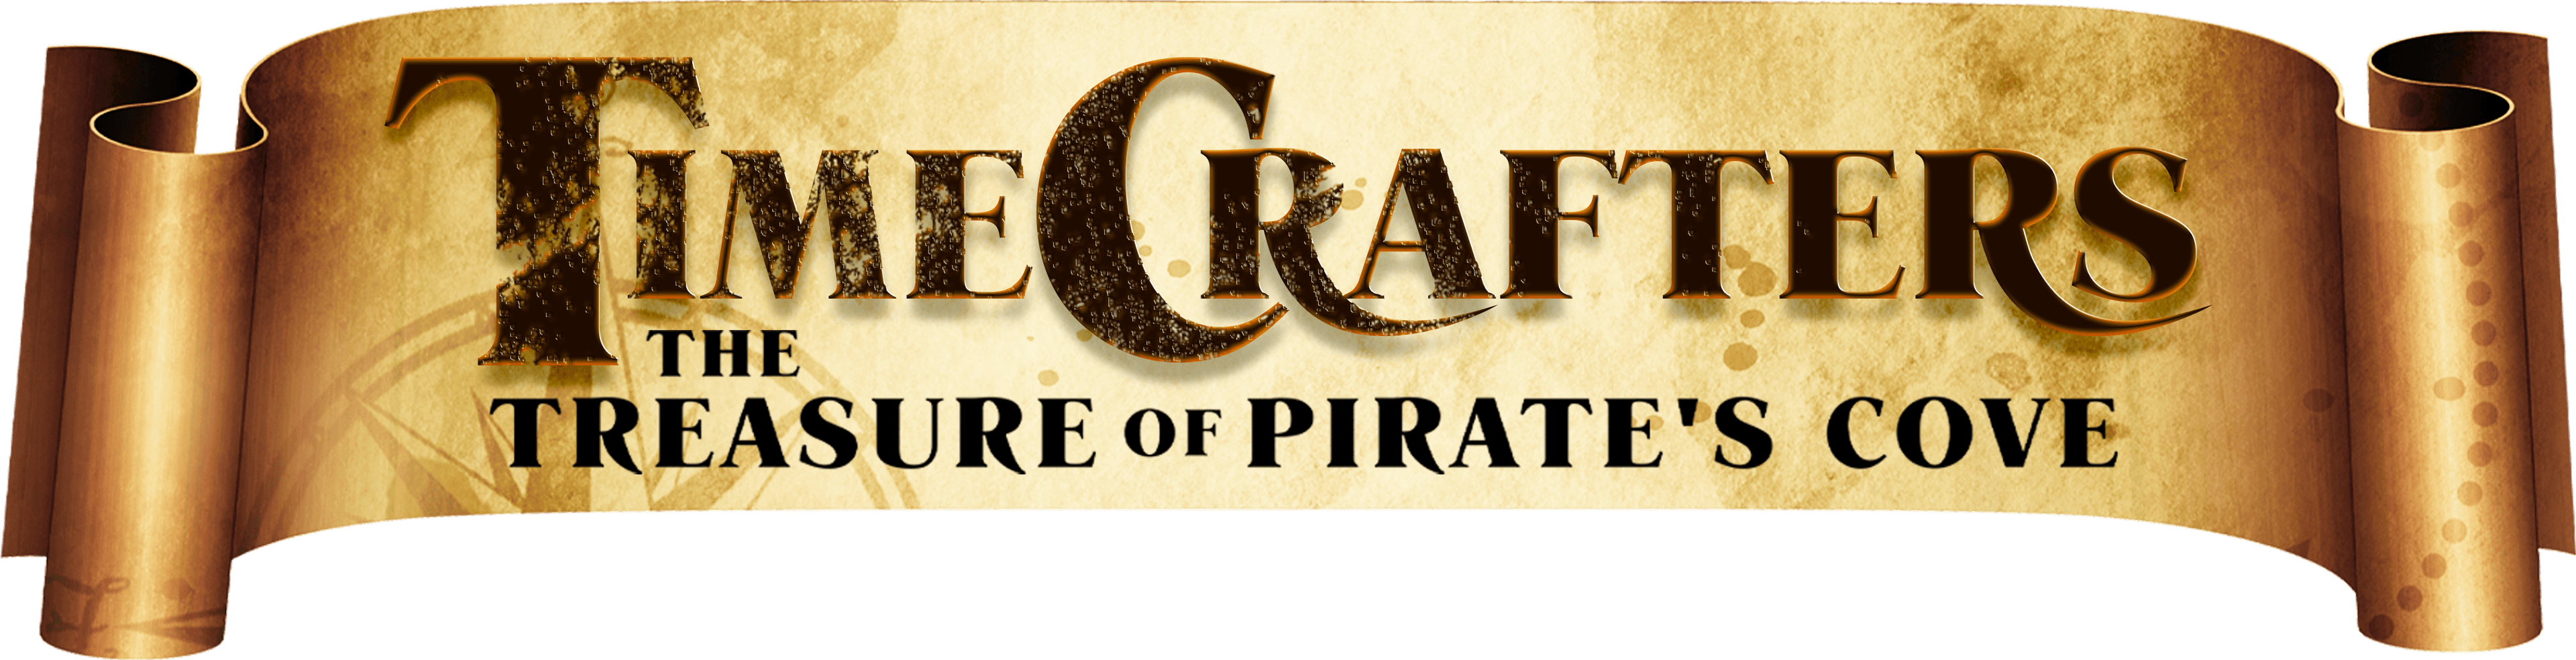 TimeCrafters: The Treasure of Pirate's Cove logo